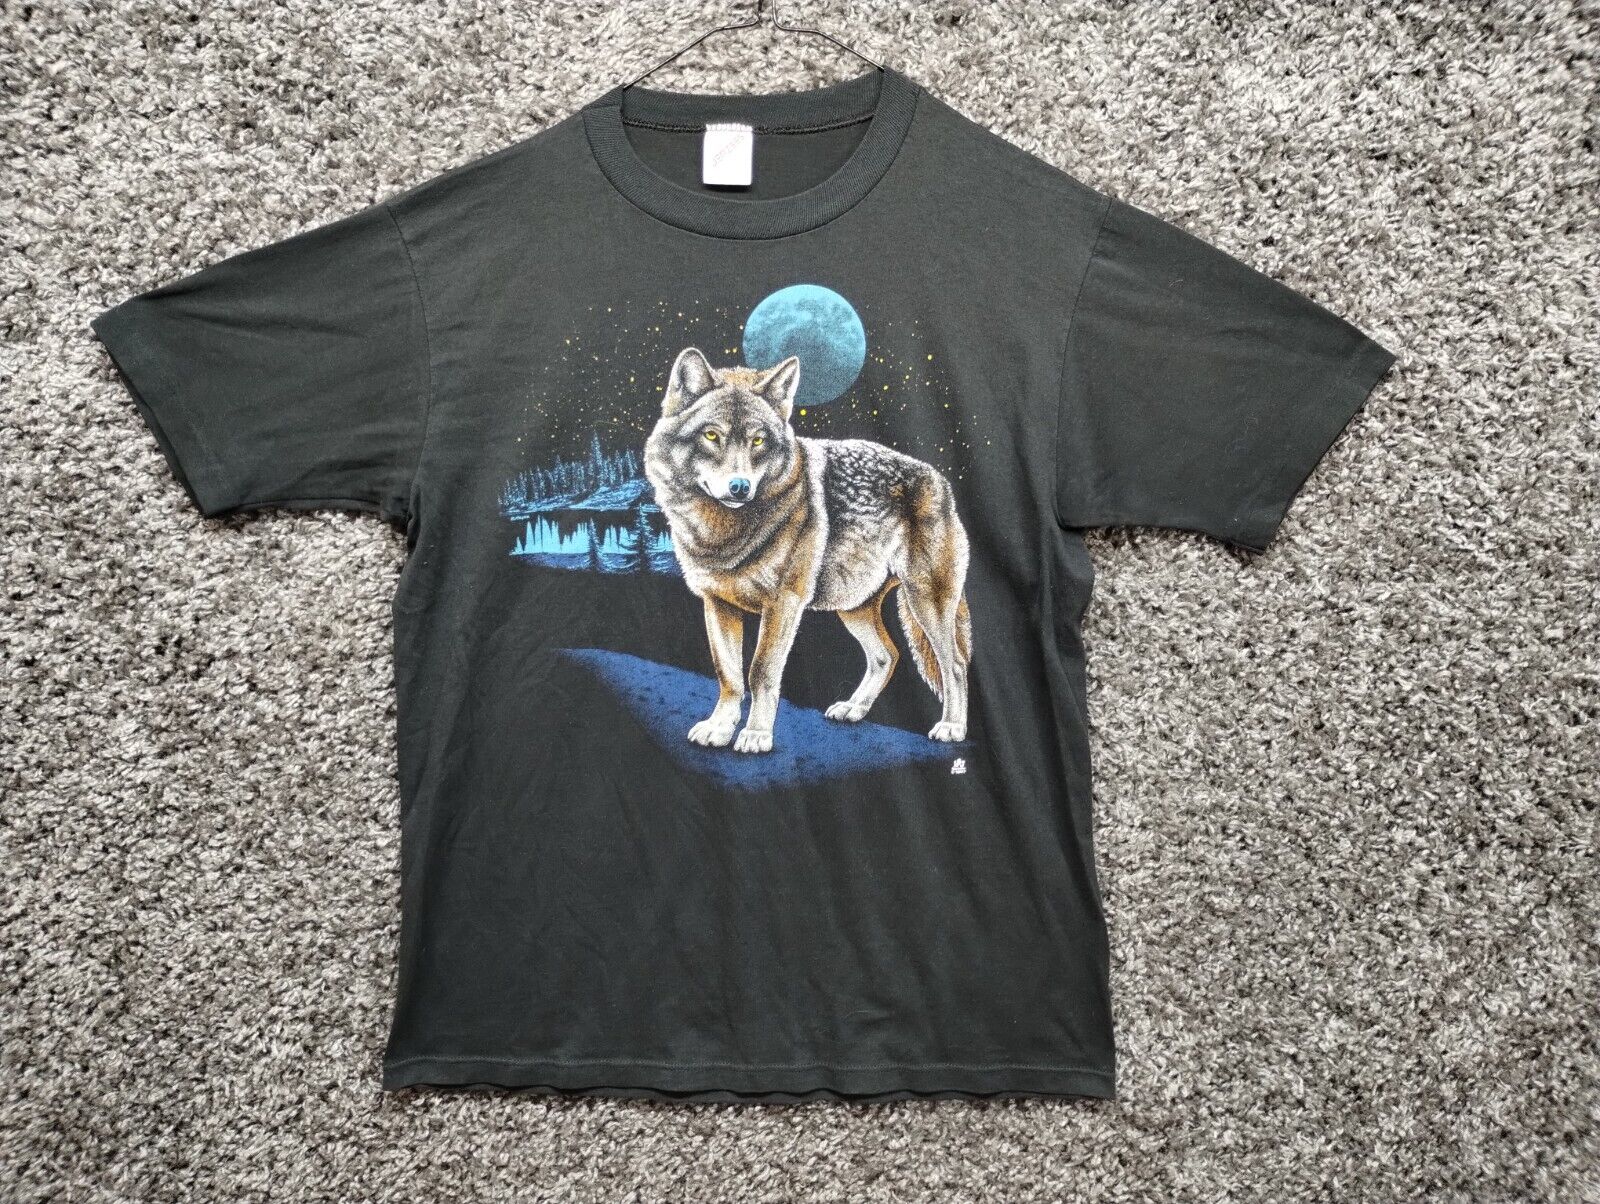 Vintage 80s Wolf Nature T Shirt Adult Large Black Single Stitch Tee Moon Graphic